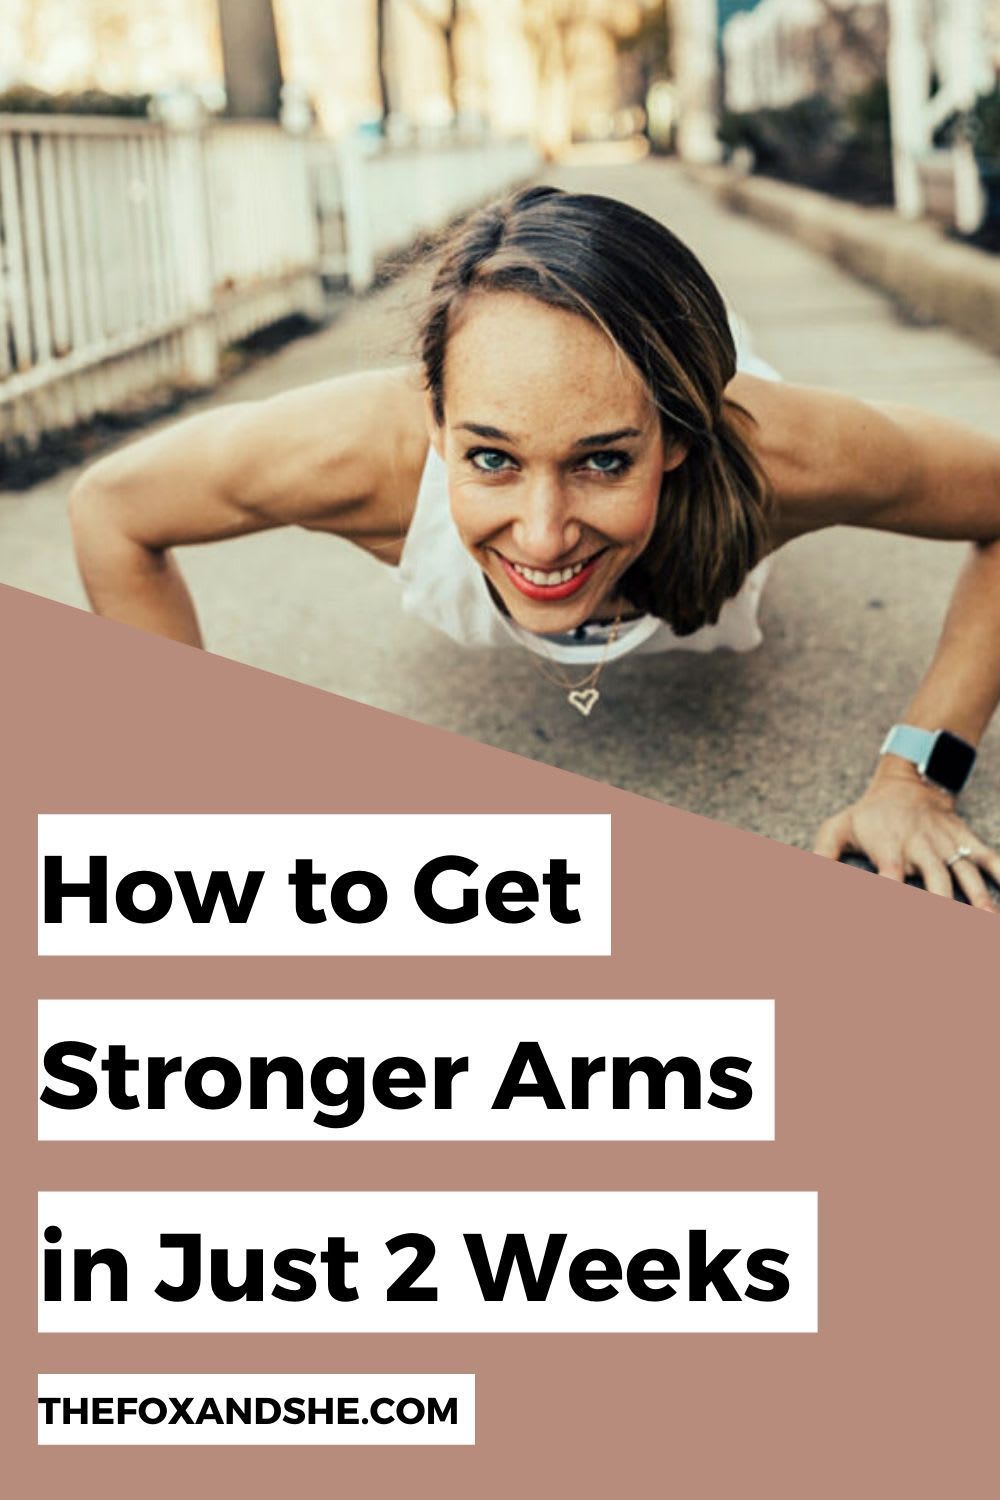 Try this Easy Trick & Get Stronger Arms in 2 Weeks